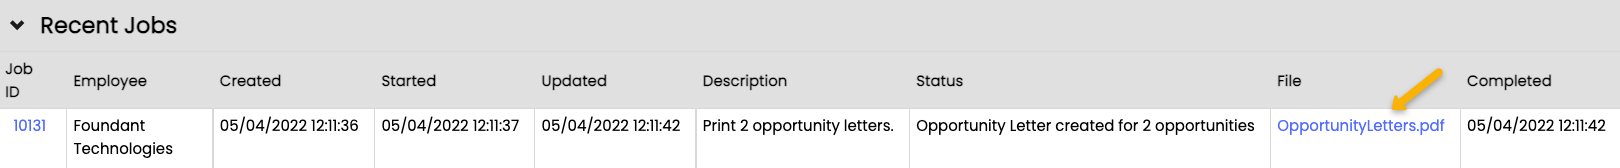 5.4.22_Opportunity_Letters_4.png